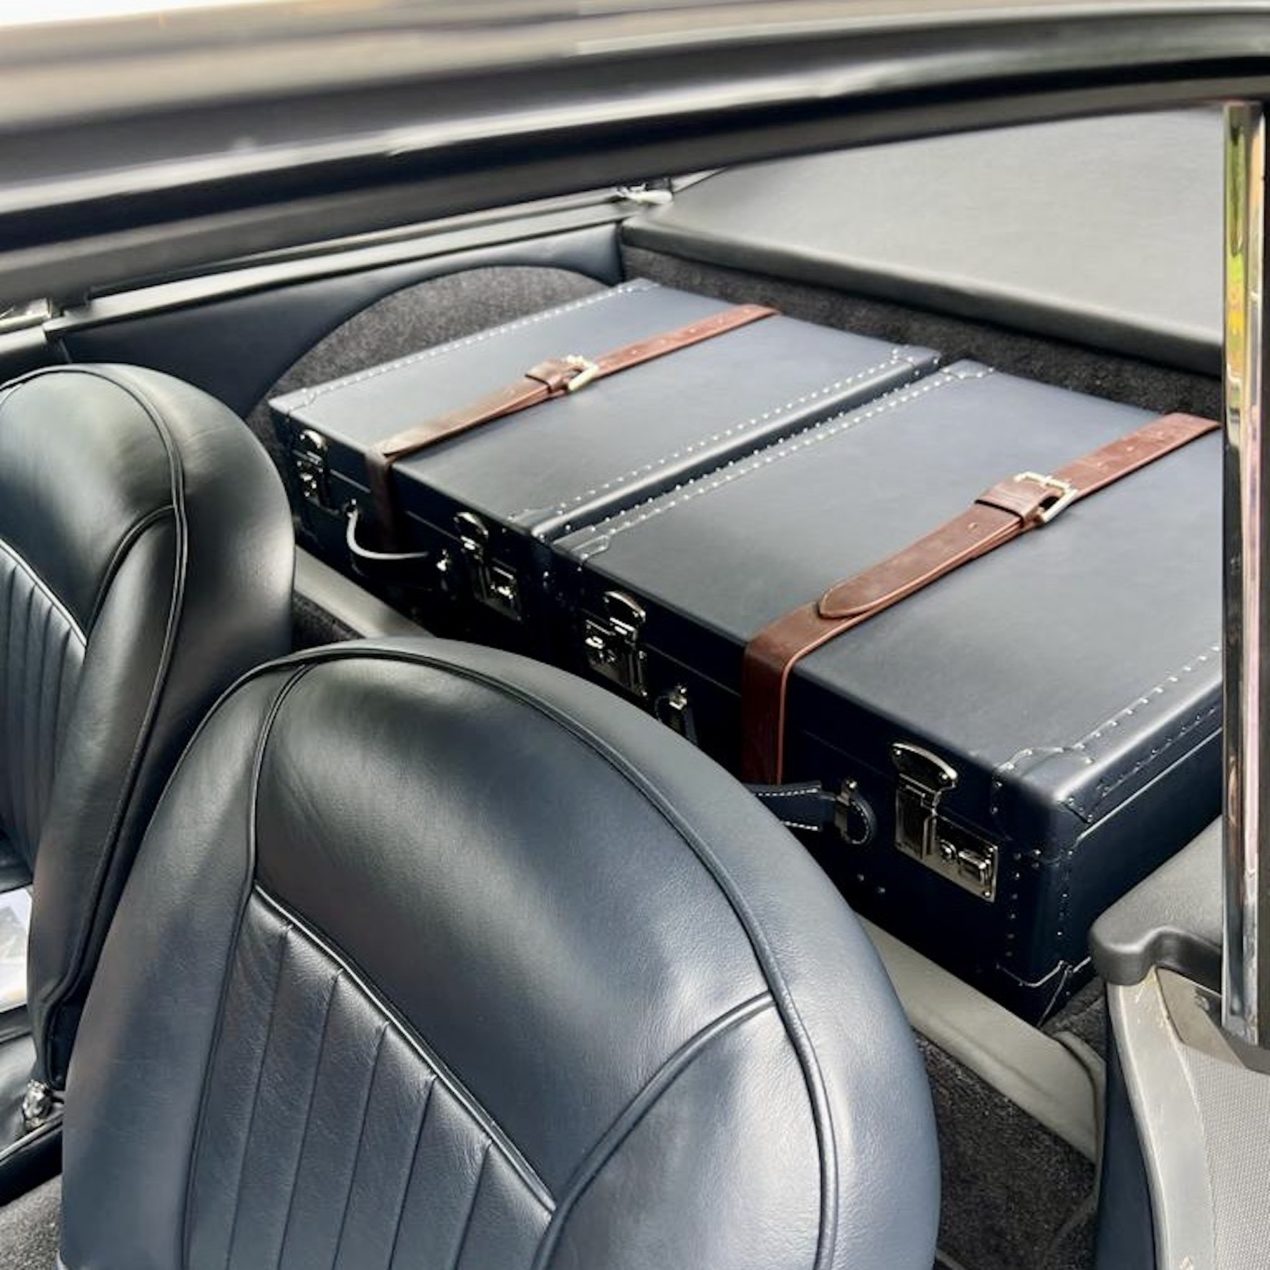 Aston Martin DB4GT suitcase in dark blue Connolly leather